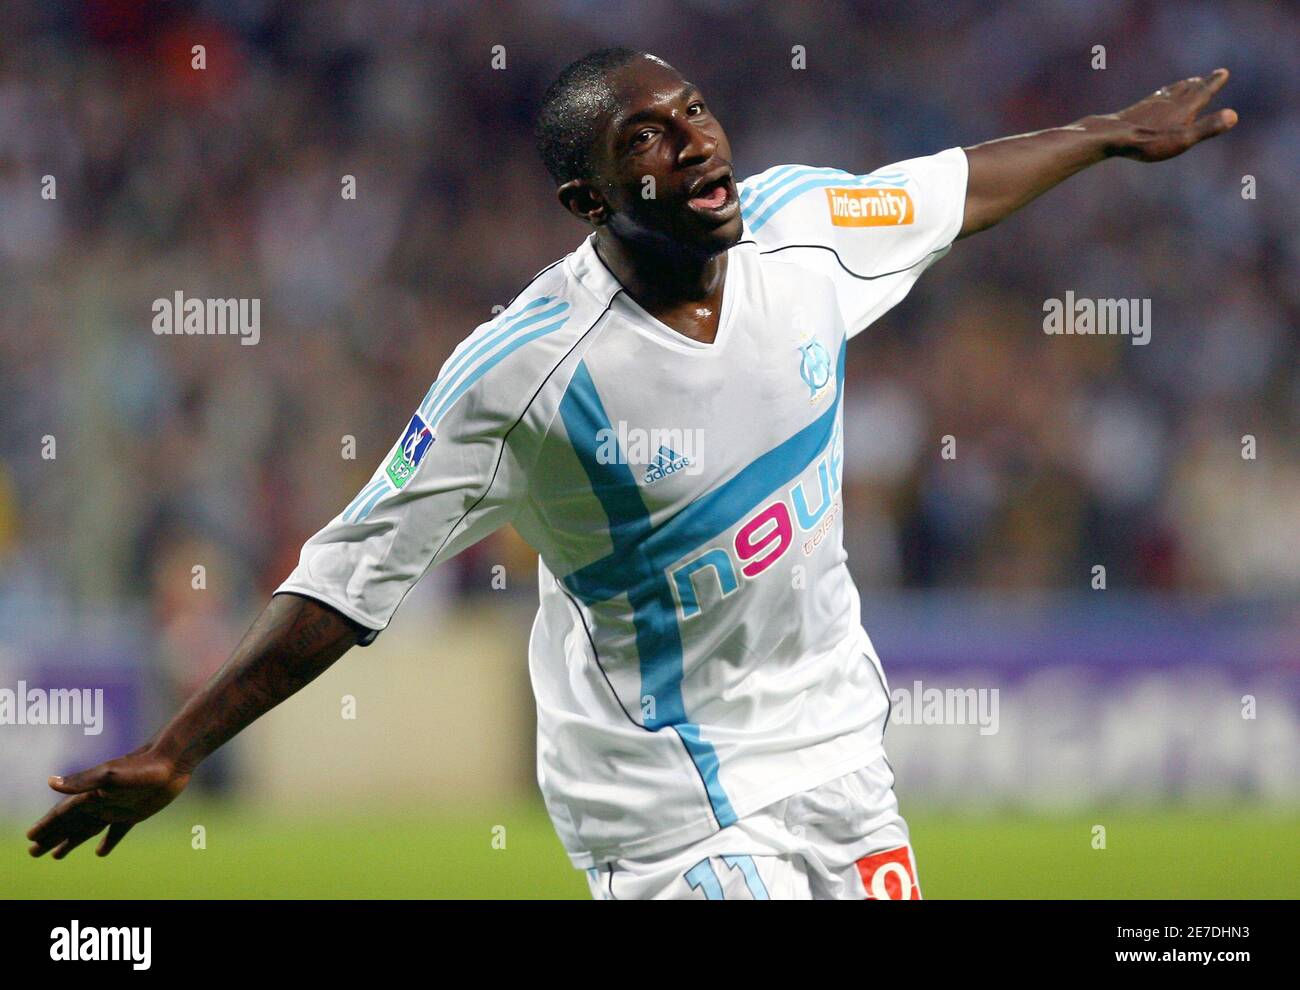 Olympique Marseille's Mamadou Niang celebrates after scoring against Nancy  during their French Ligue 1 soccer match in Marseille April 15, 2006.  REUTERS/Jean-Paul Pelissier Stock Photo - Alamy